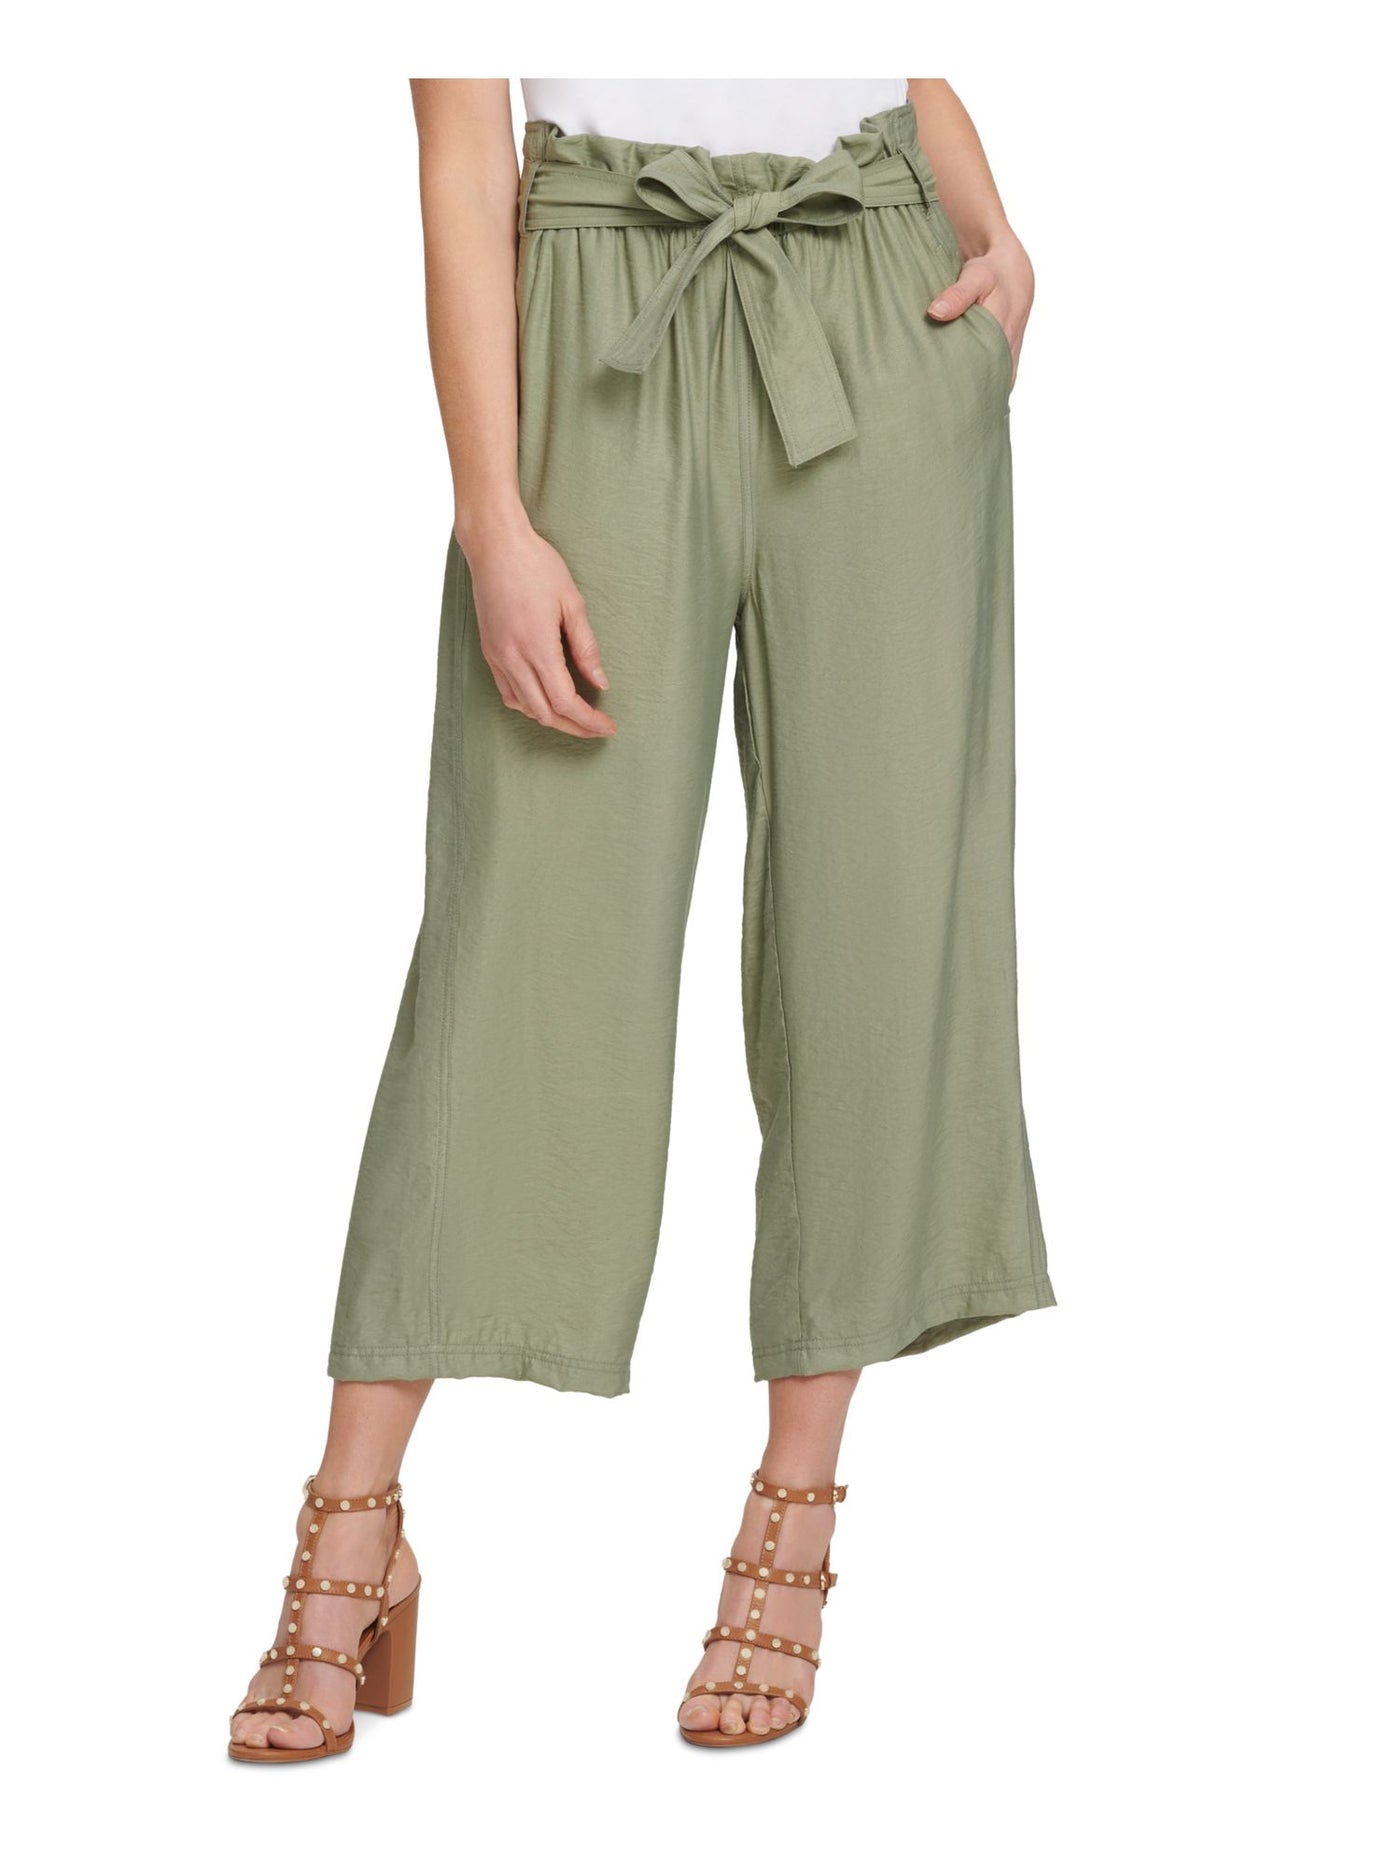 DKNY Womens Green Pocketed Belted Paperbag-waist Cropped Wide Leg Pants L